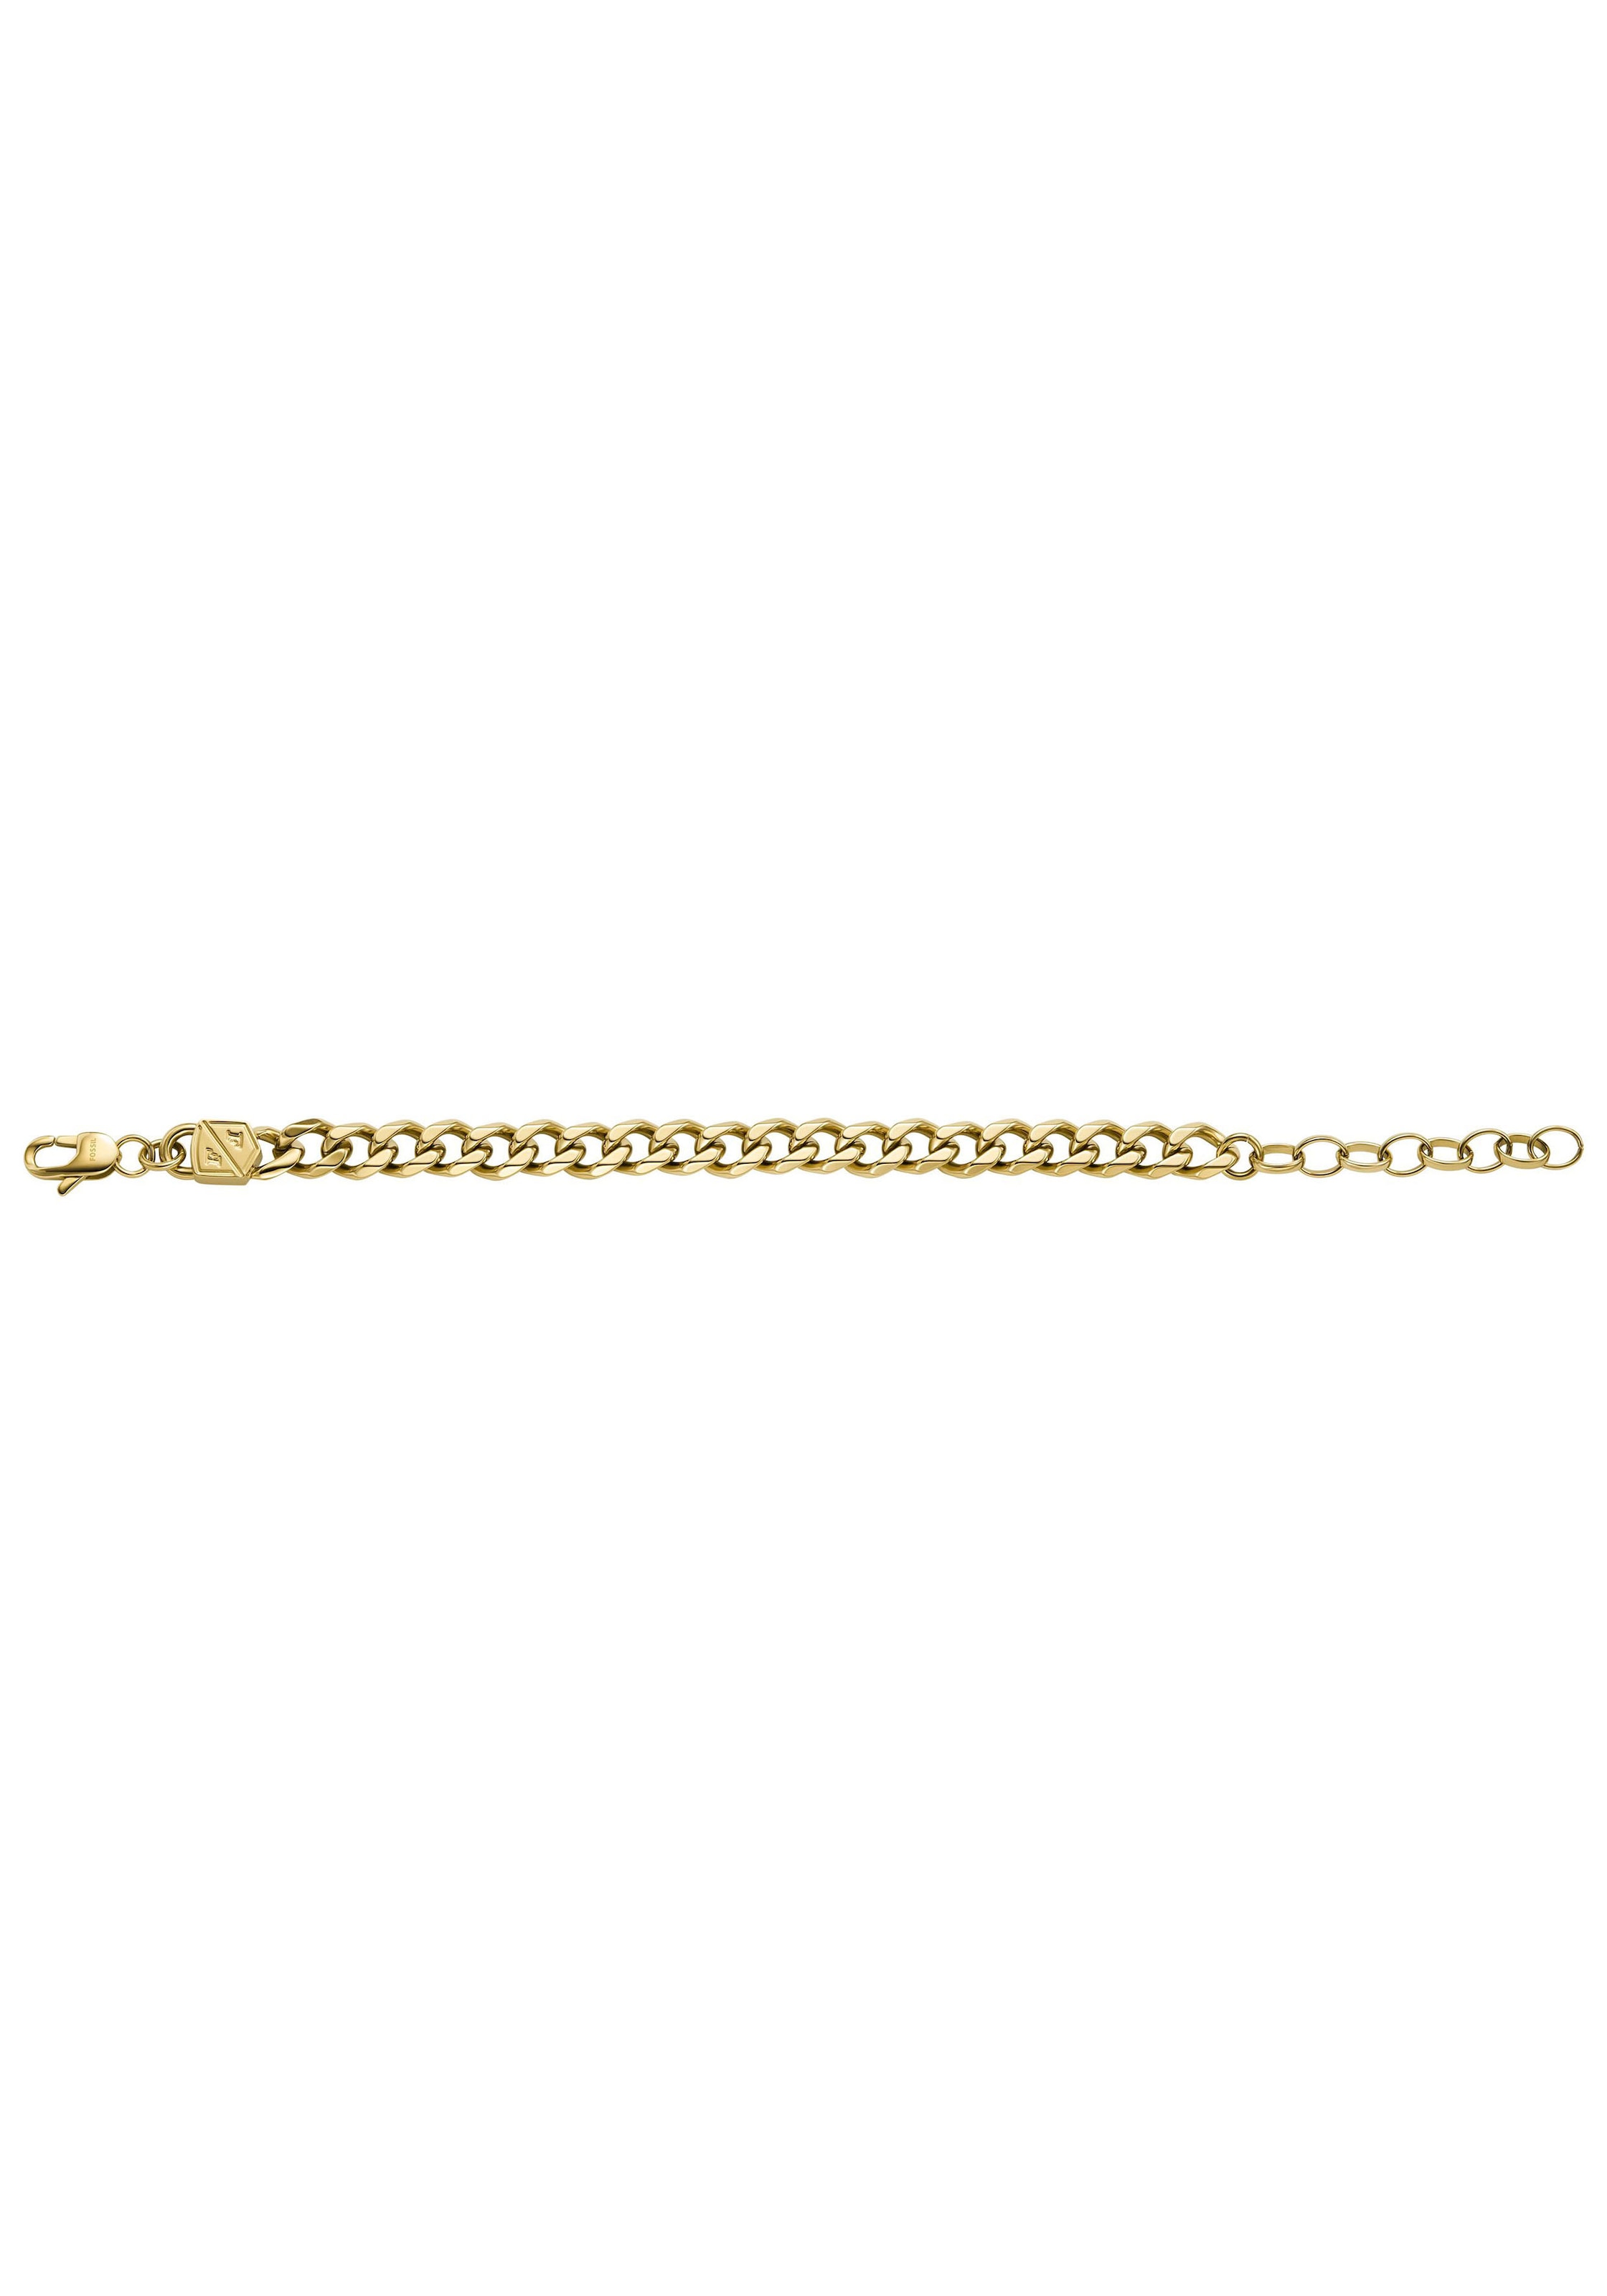 BOLD Online OTTO Edelstahl im JF04634001«, Edelstahlarmband JF04616710, »JEWELRY JF04615040, Fossil CHAINS, Shop